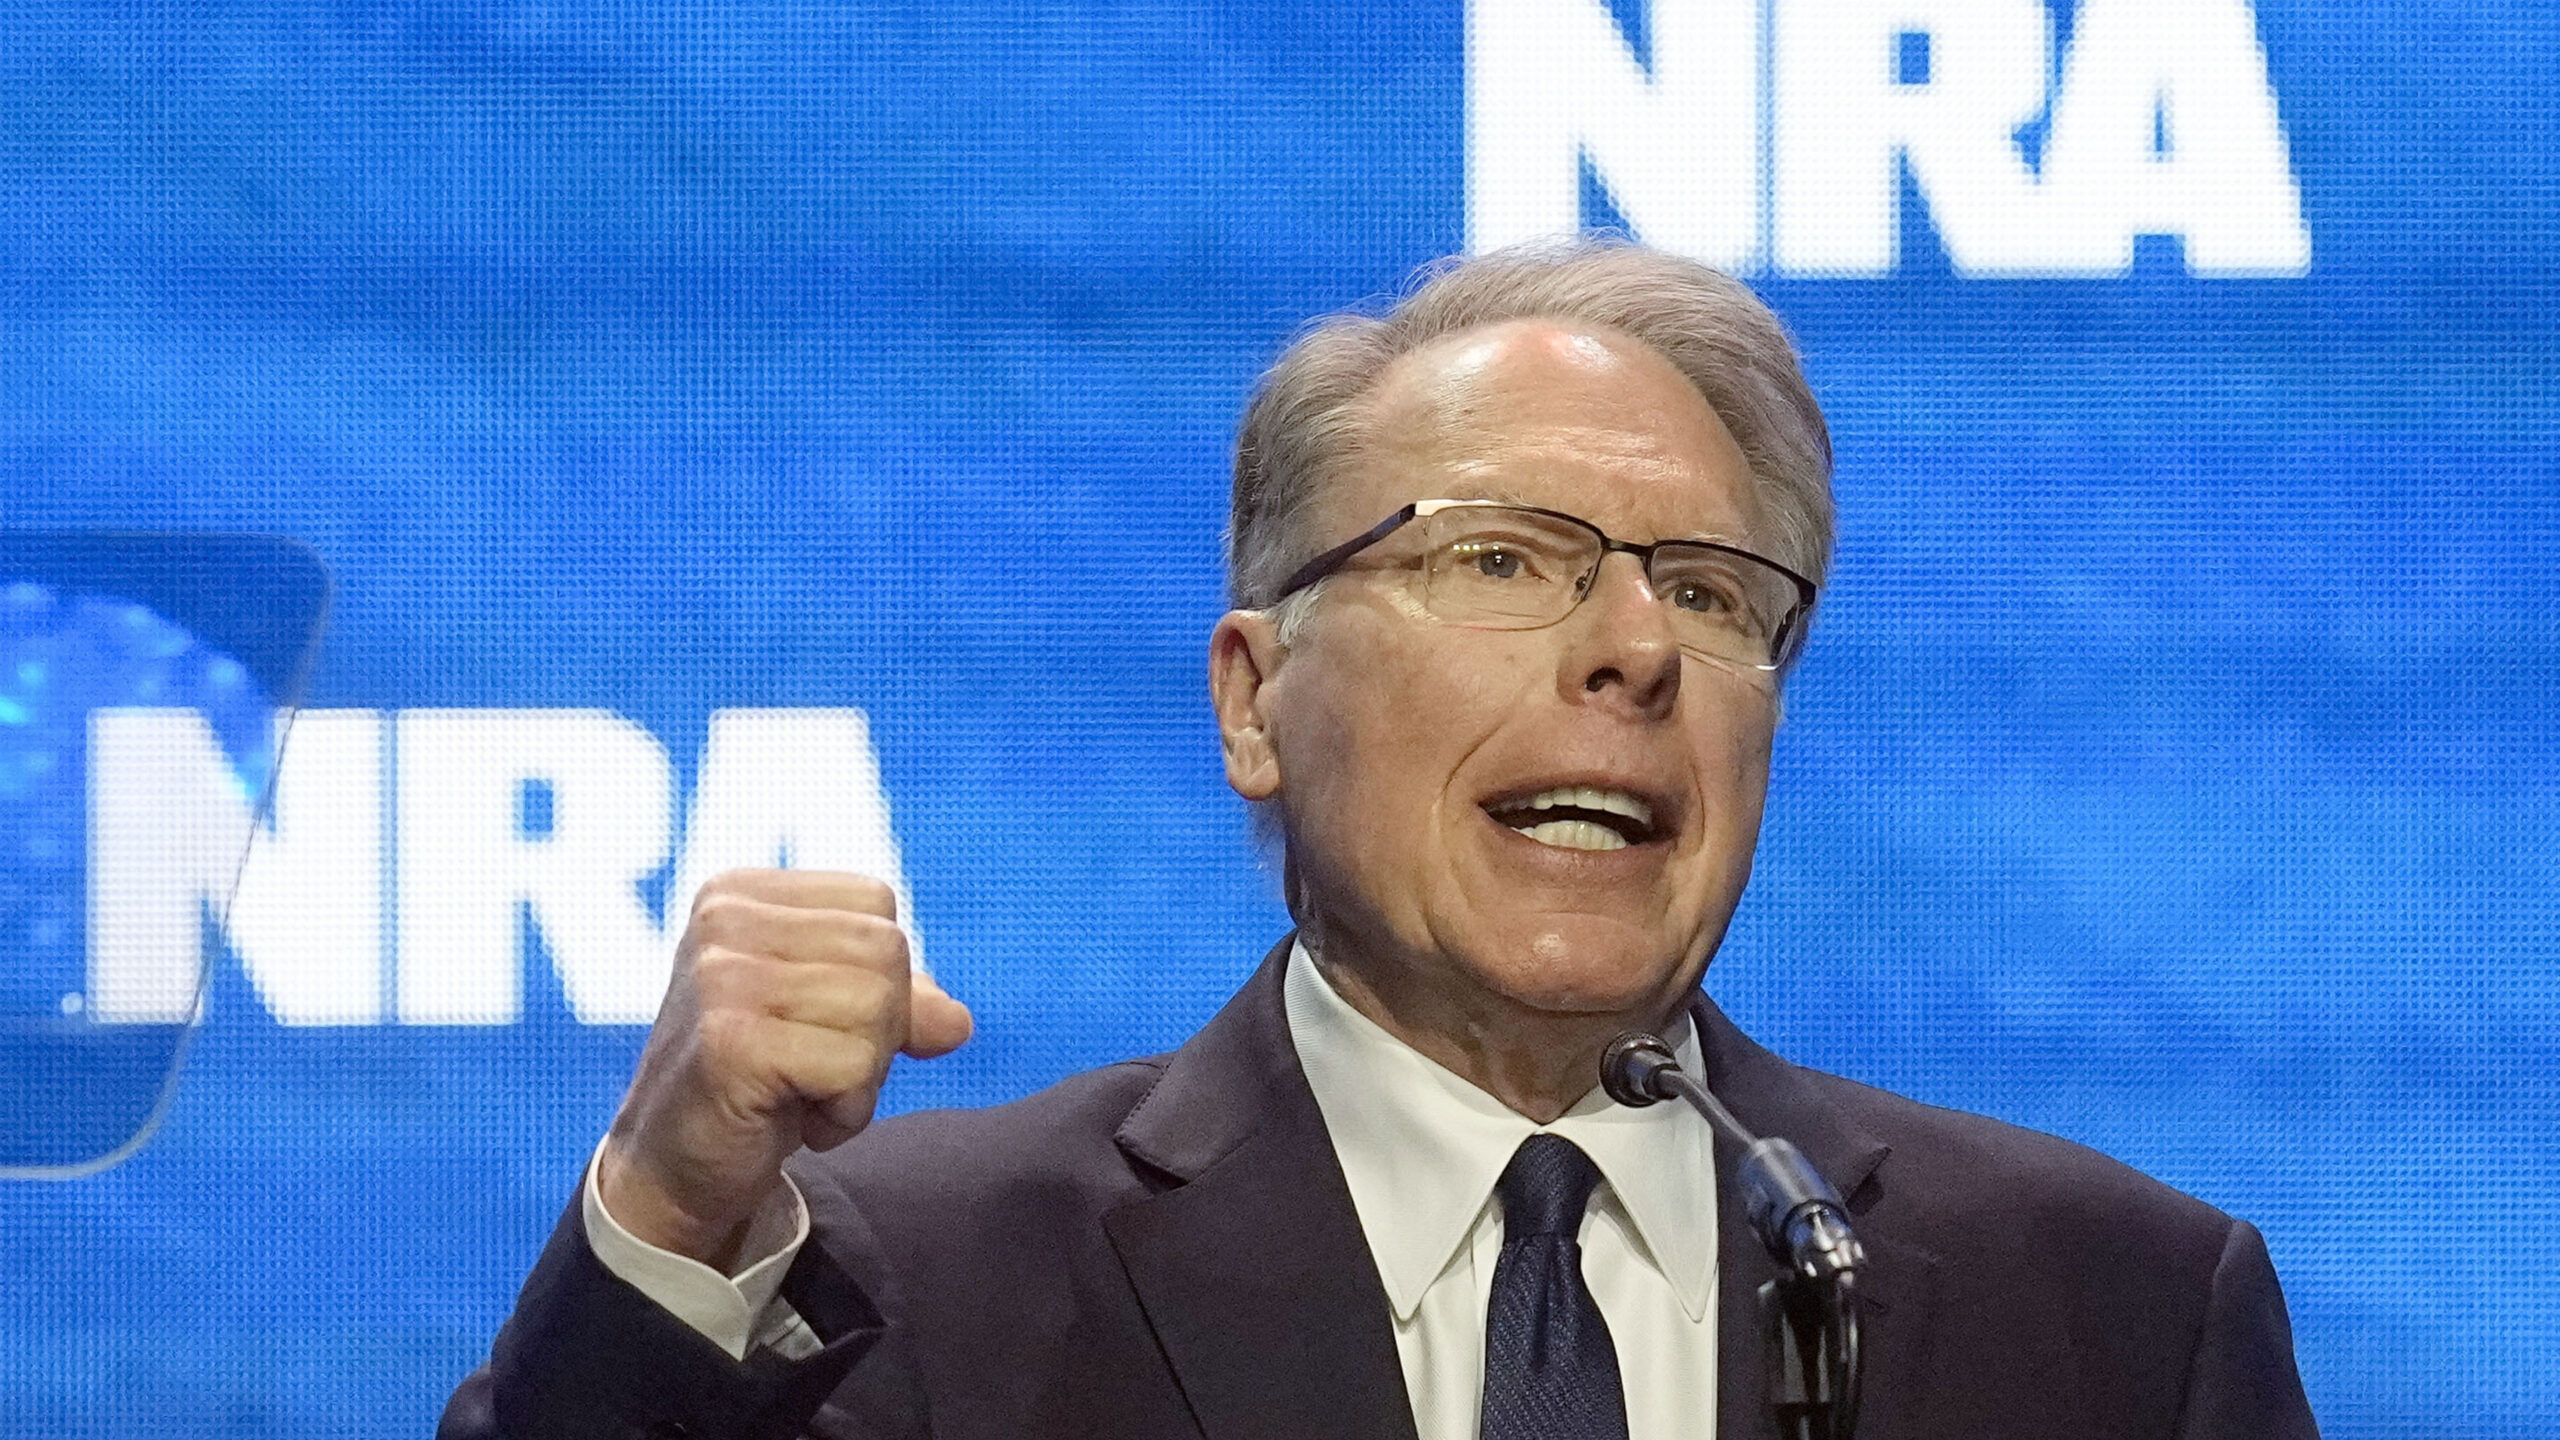 Wayne LaPierre, CEO and executive vice-president of the National Rifle Association, addresses the NRA convention in